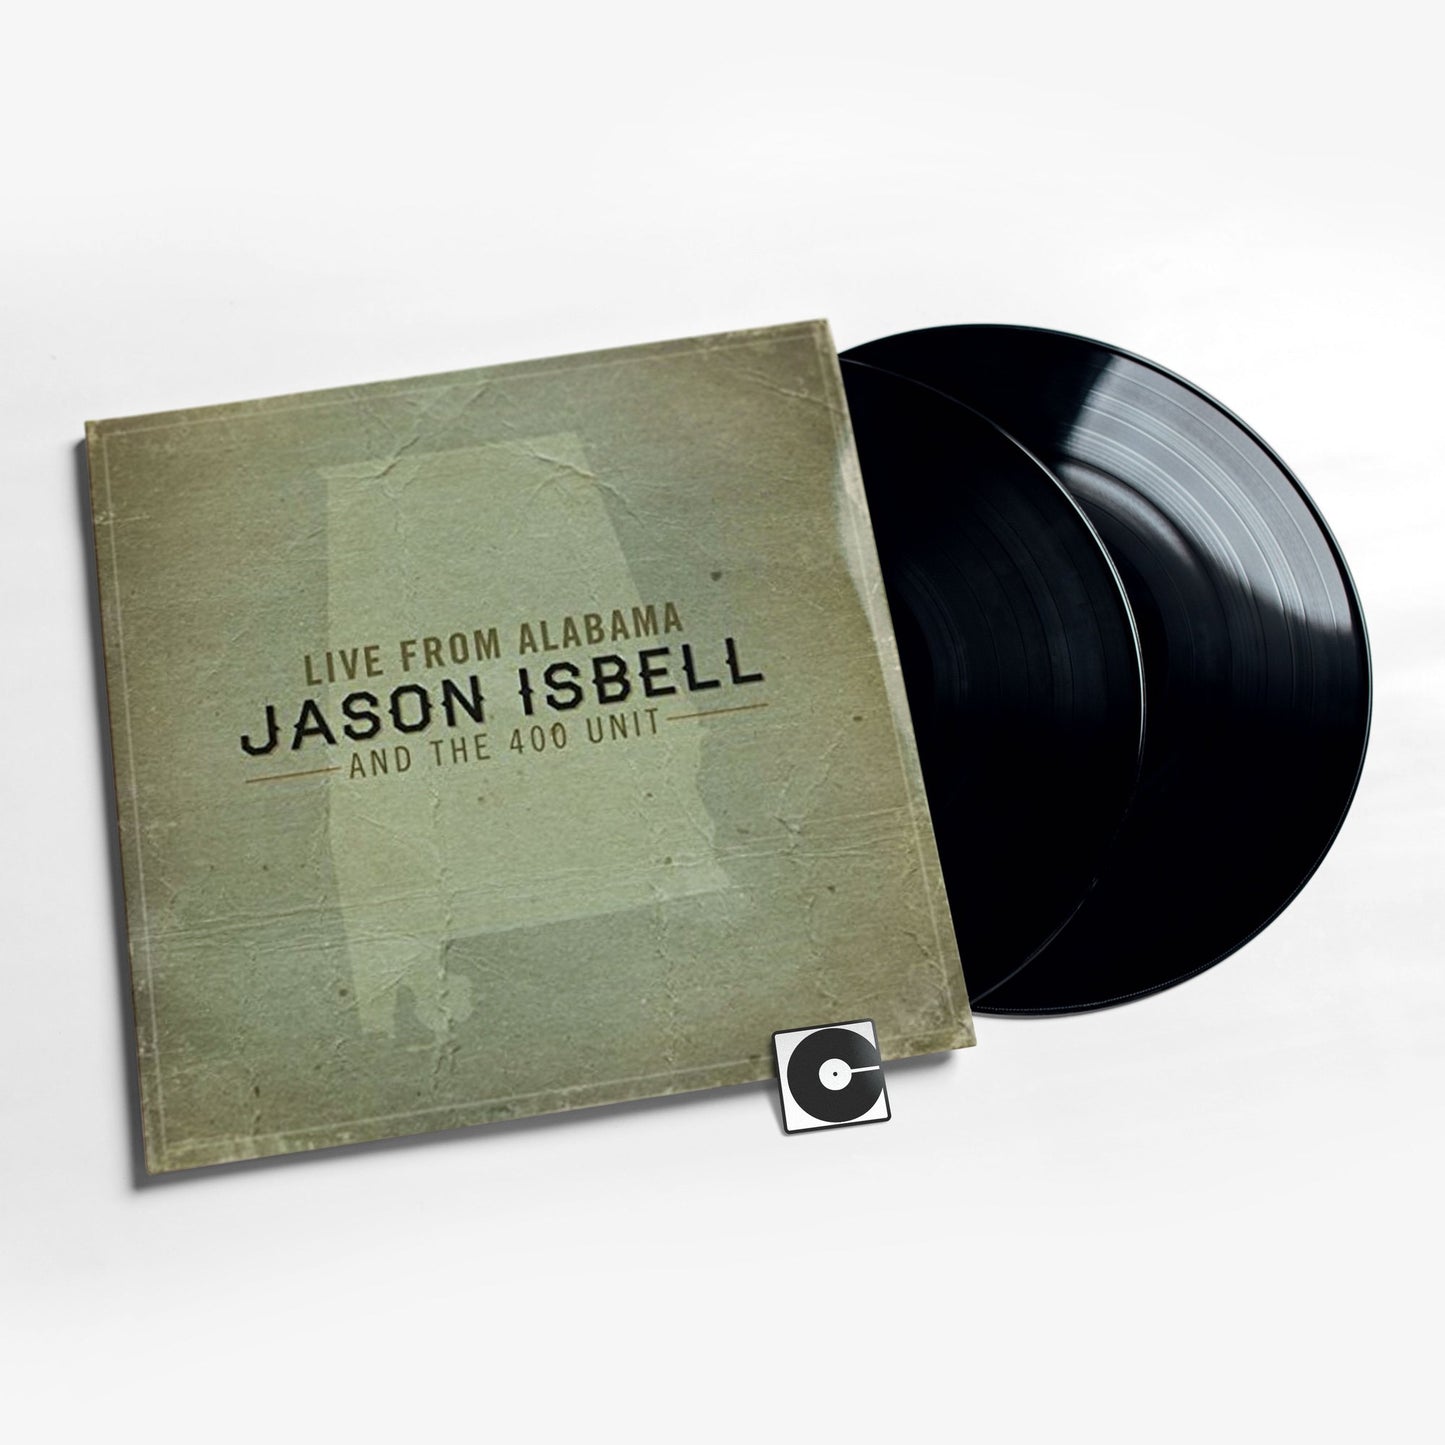 Jason Isbell And The 400 Unit - "Live From Alabama"